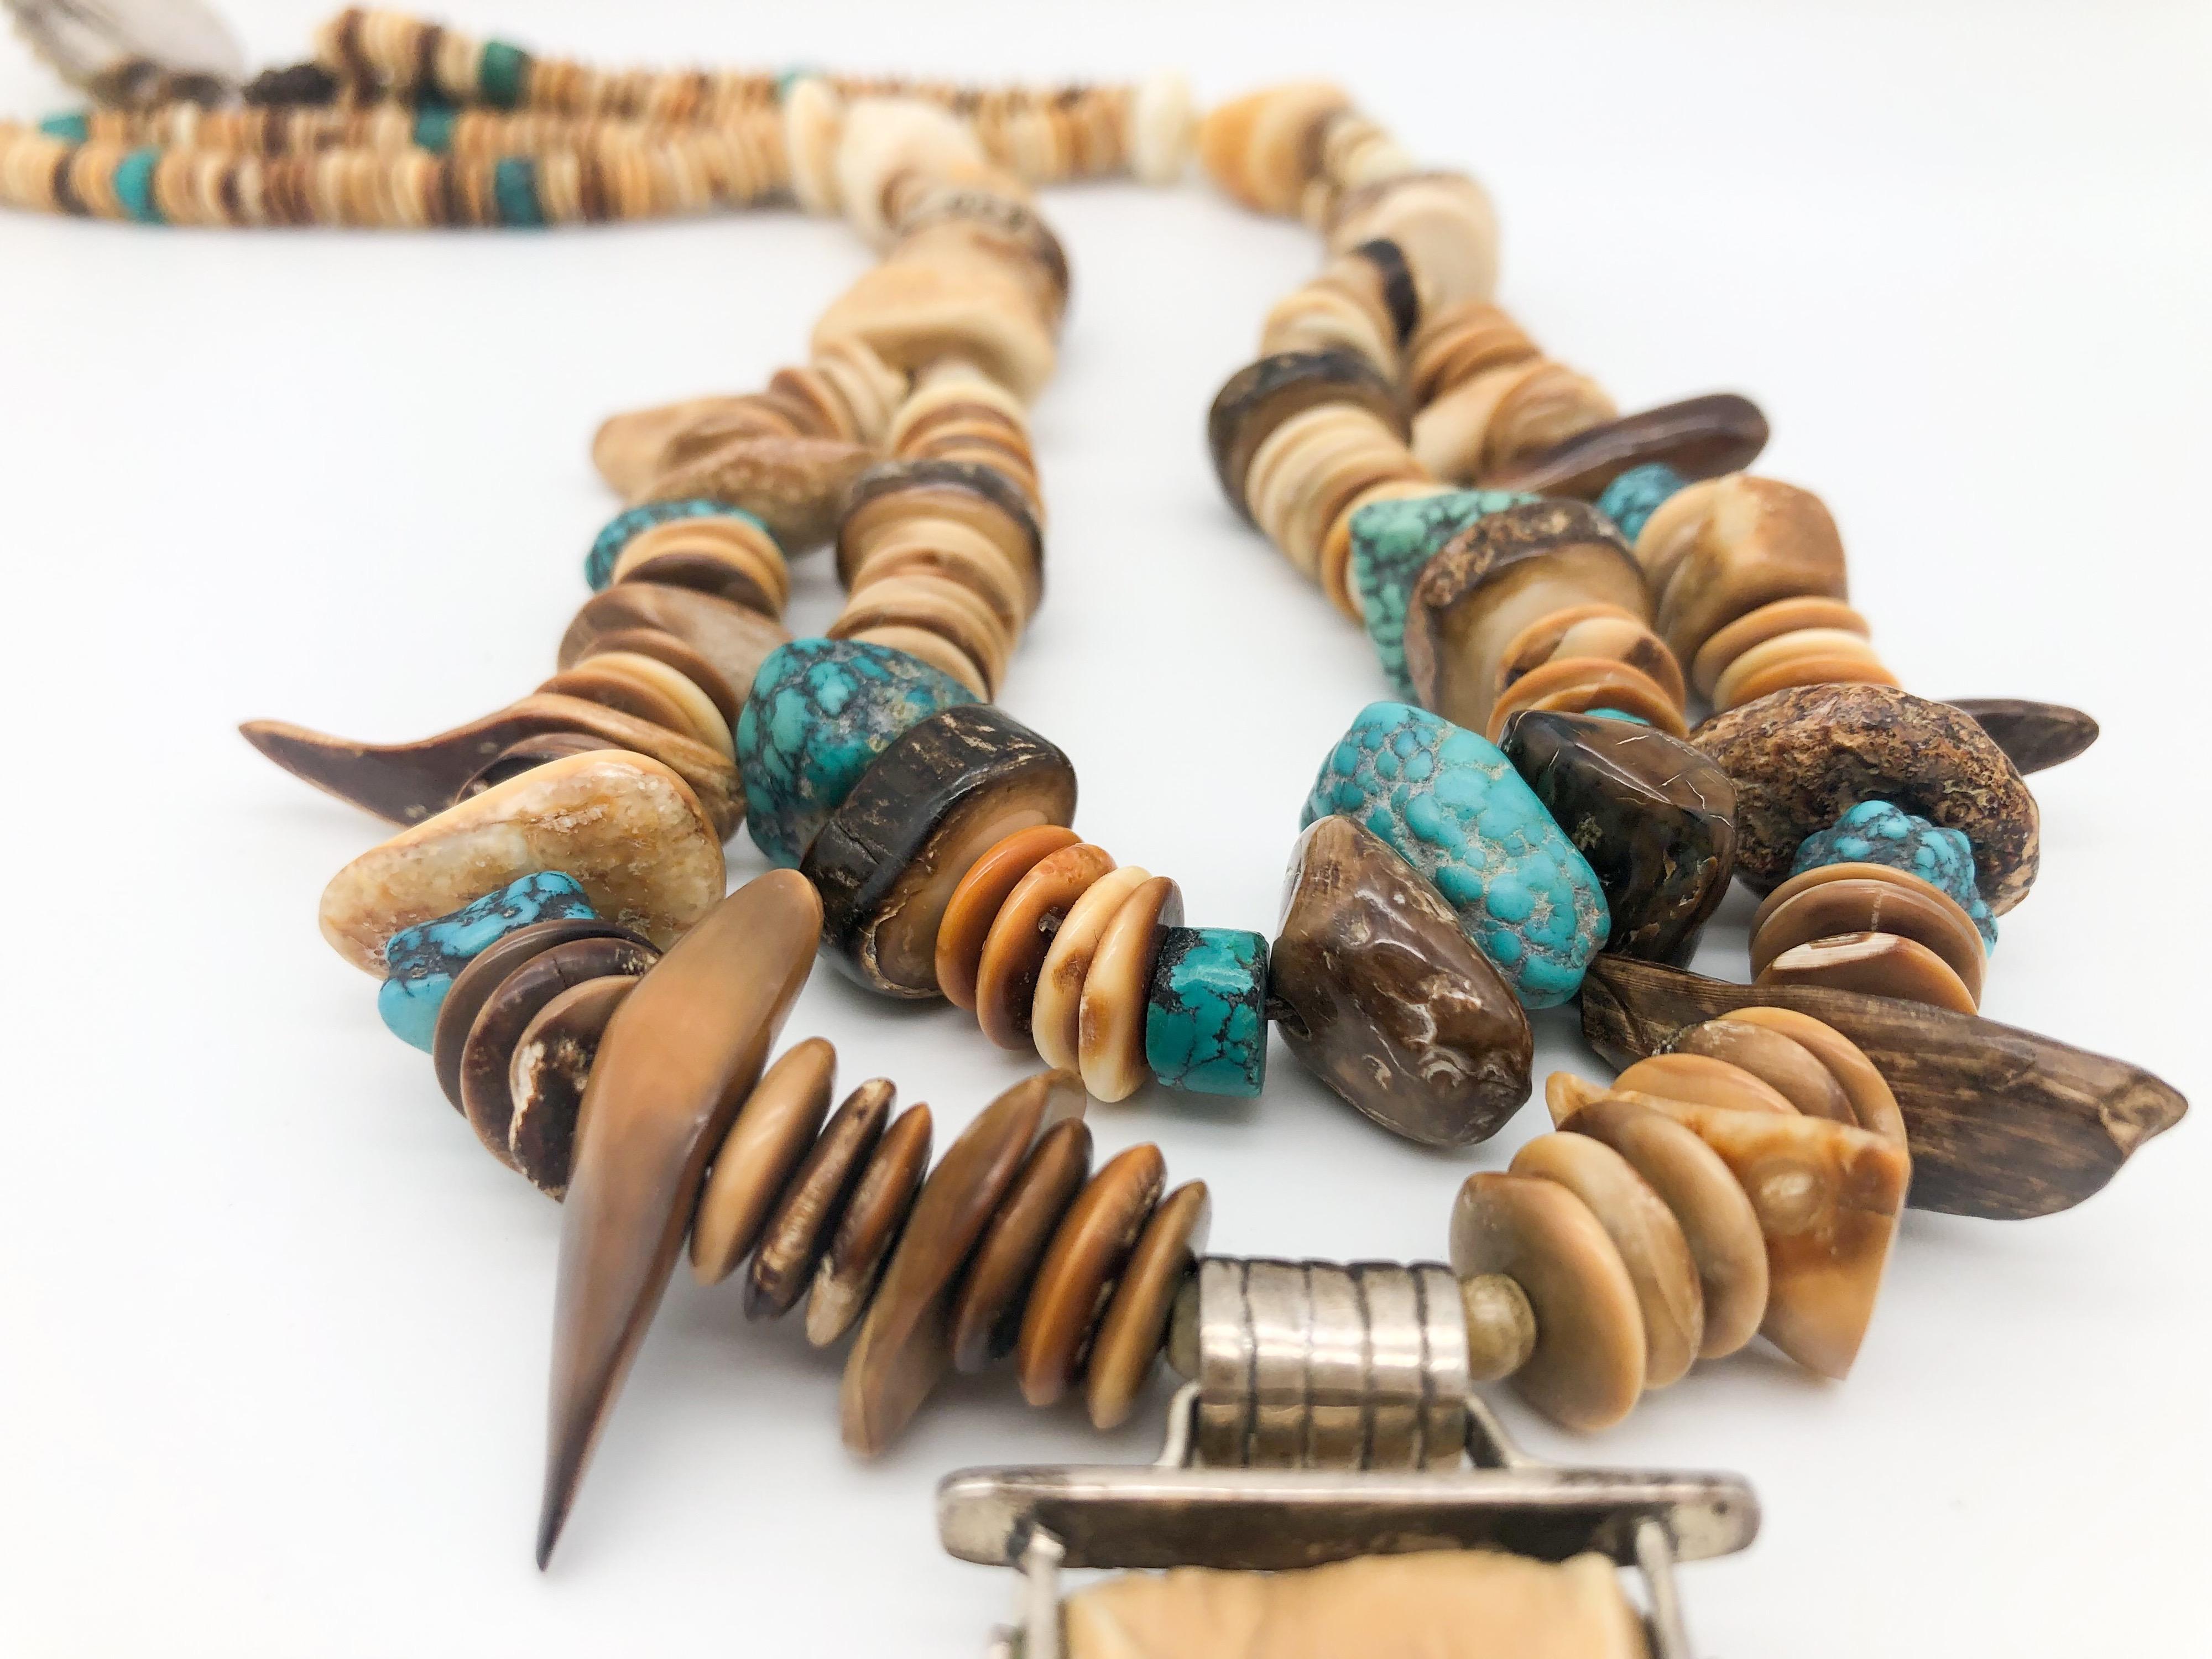 Mixed Cut A.Jeschel Remarkable prehistoric Turquoise and Fossil Pendant necklace. For Sale